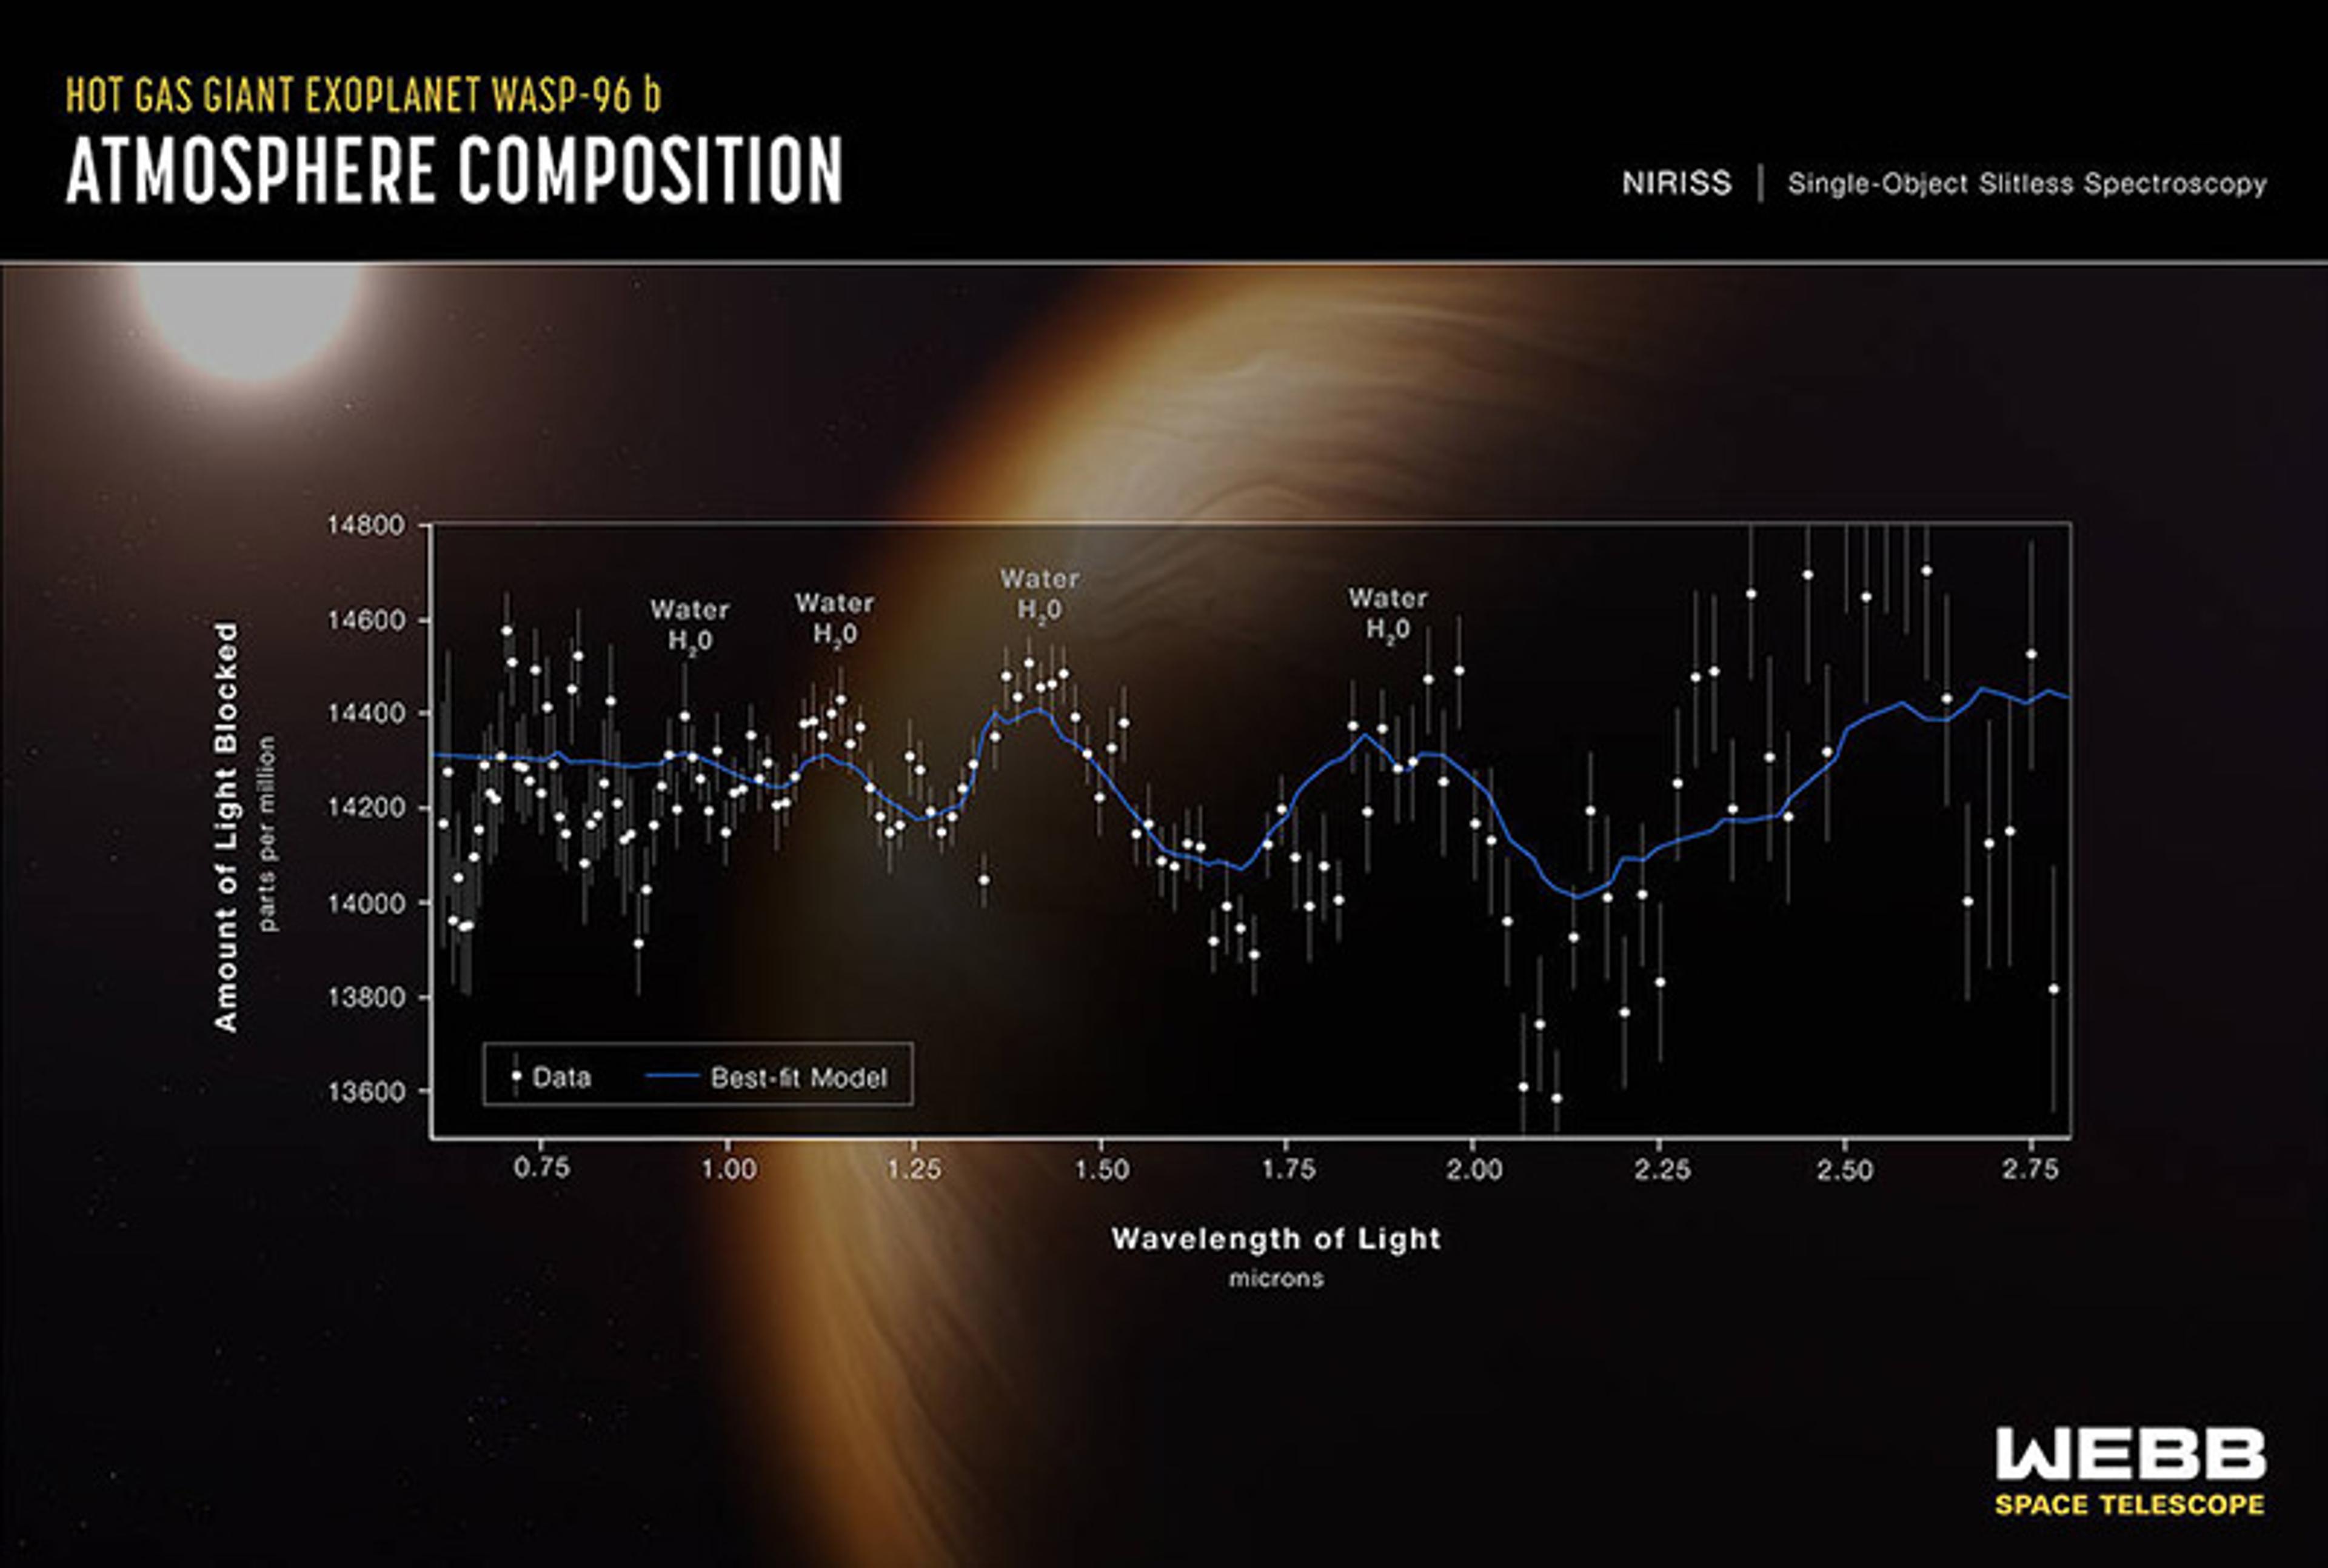 A blue line extending left to right on a graph represents the presence of water molecules in the atmosphere of an exoplanet